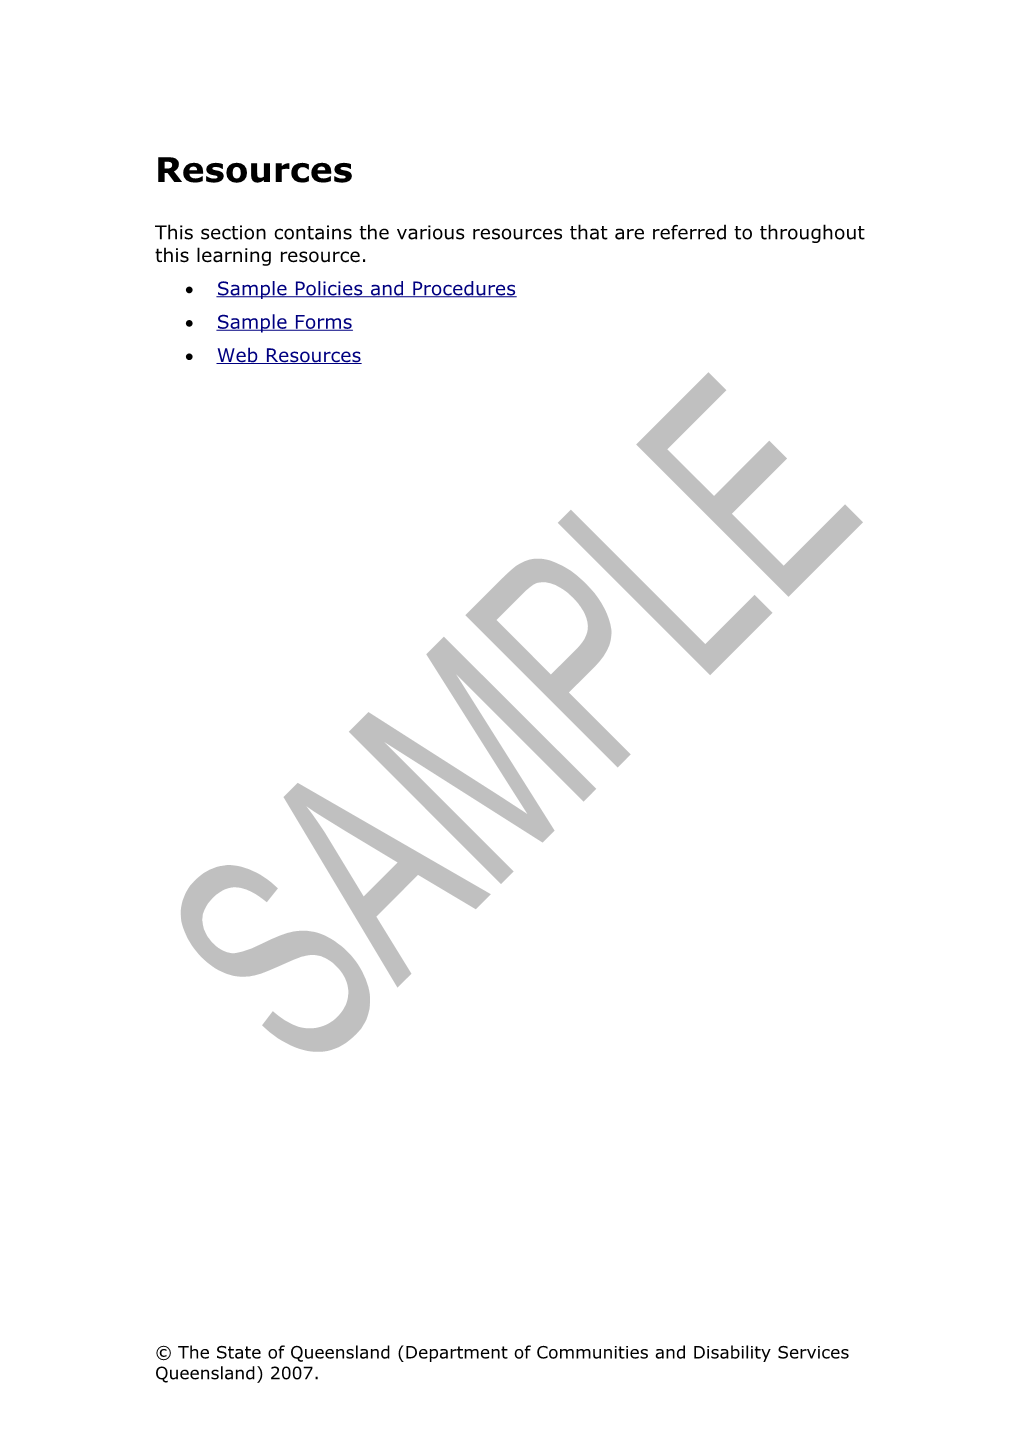 Sample Table of Contents of a Policy and Procedures Manual